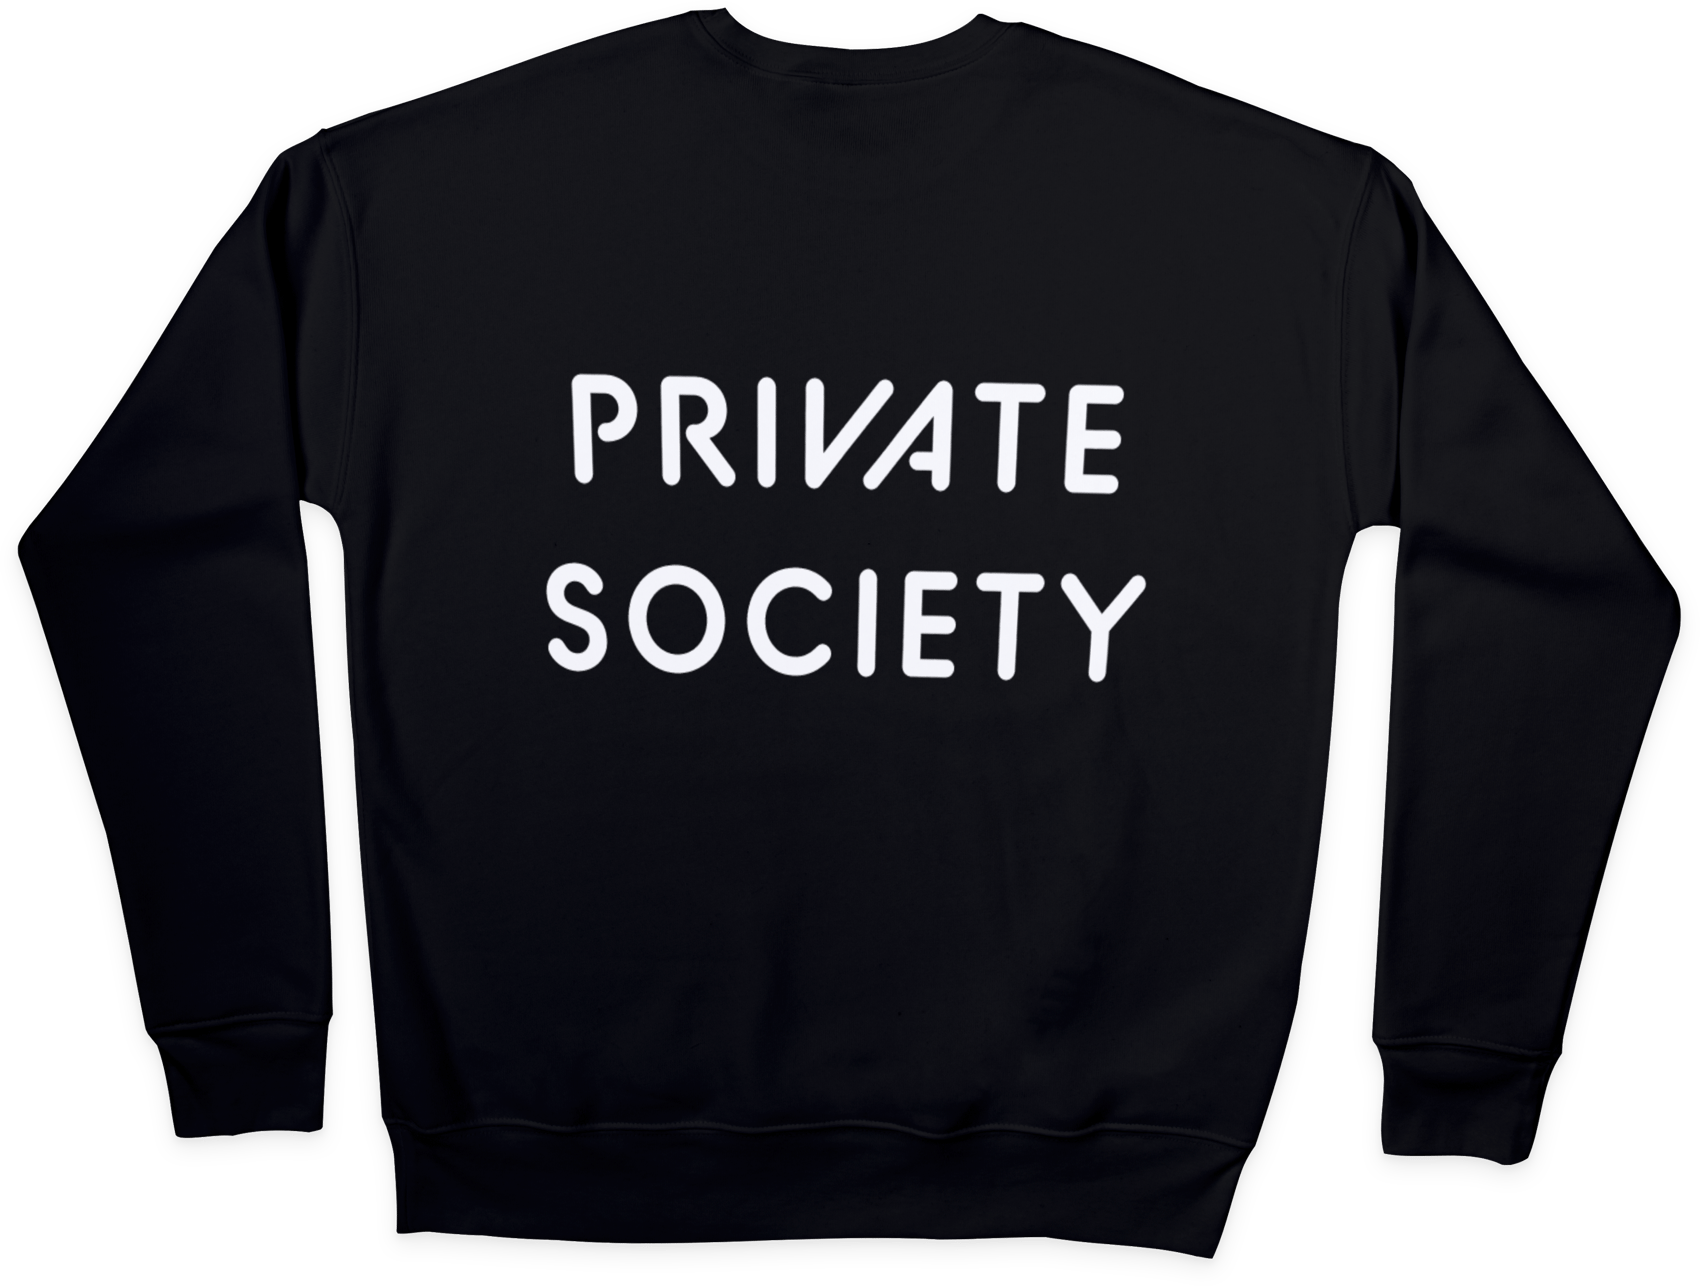 PRIVATE SOCIETY Sweatshirt IcDeadPeople